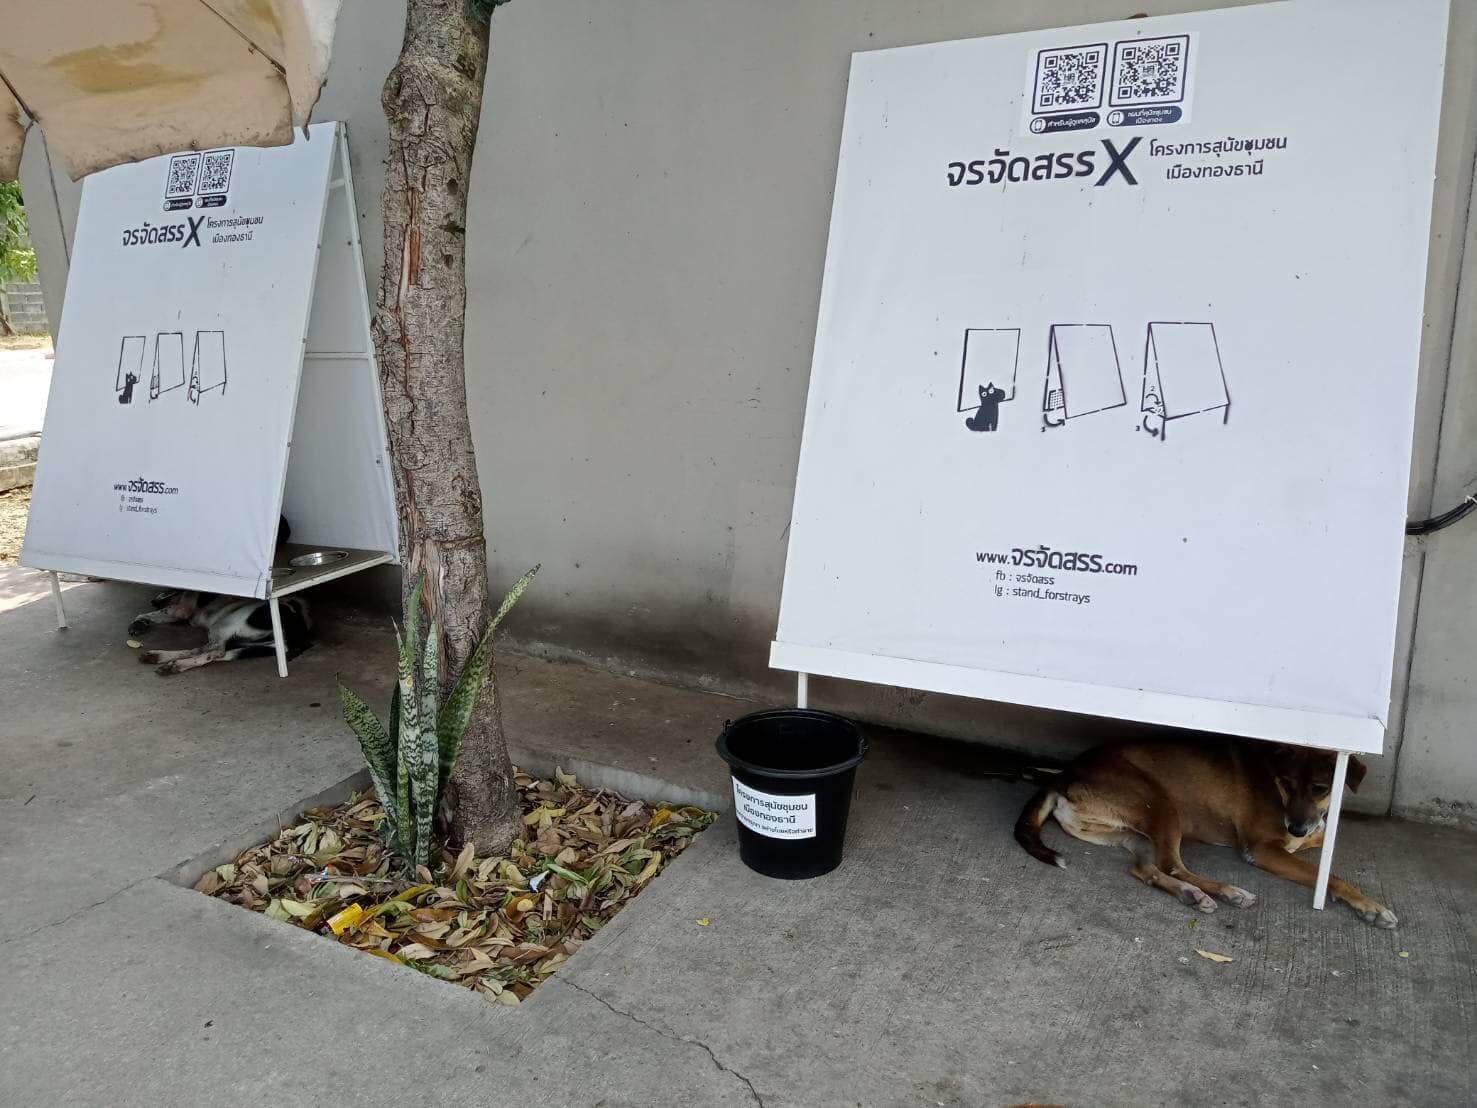 Stand for Strays recycles billboards, providing homeless dogs in Thailand  shelter in extreme weather - BrightVibes